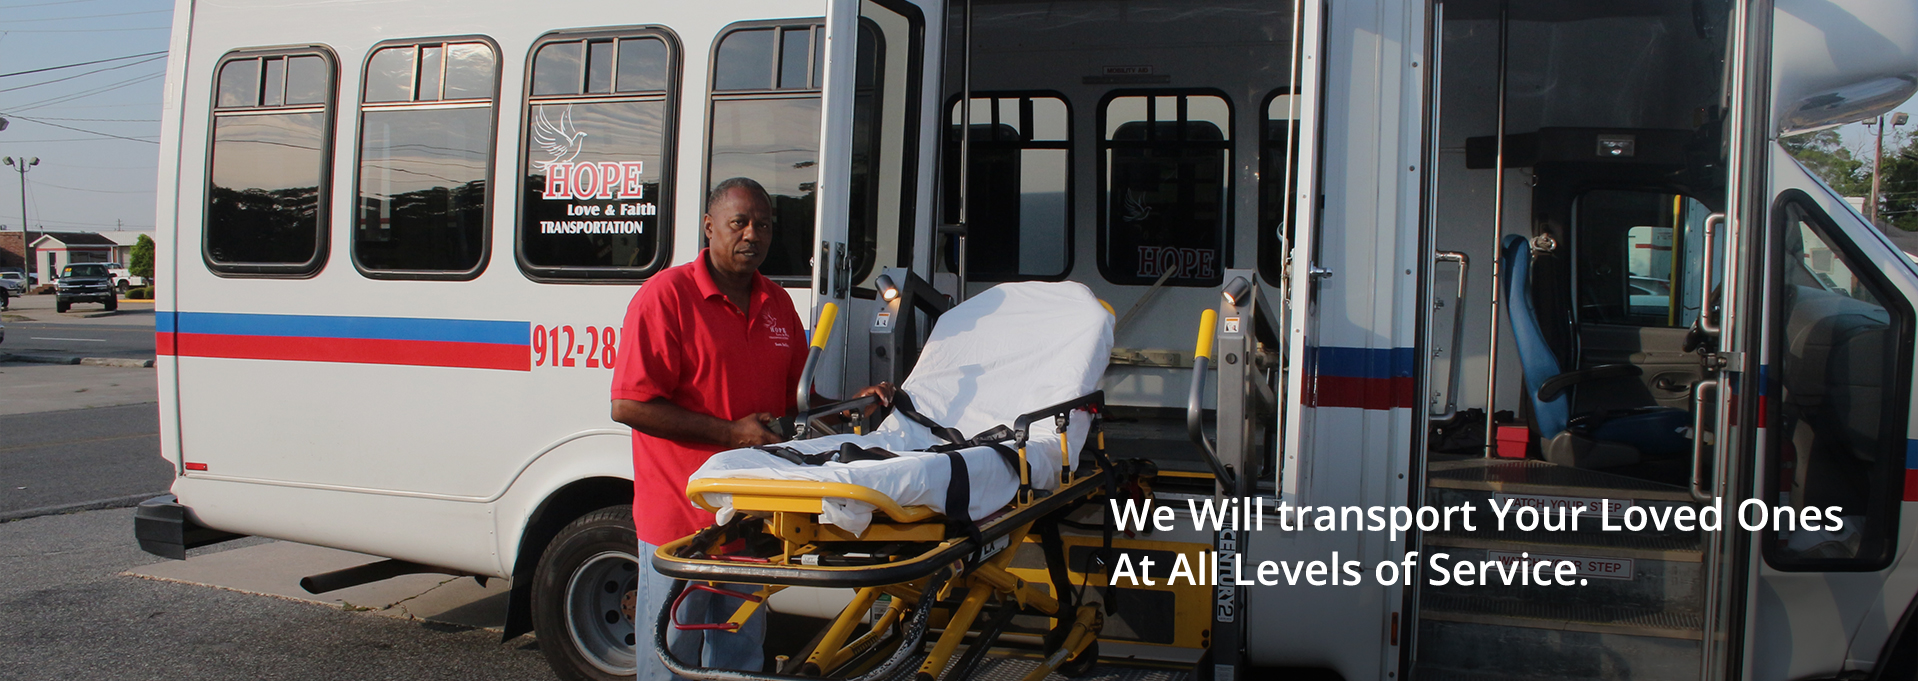 We Will transport Your Loved Ones At All Levels of Service.